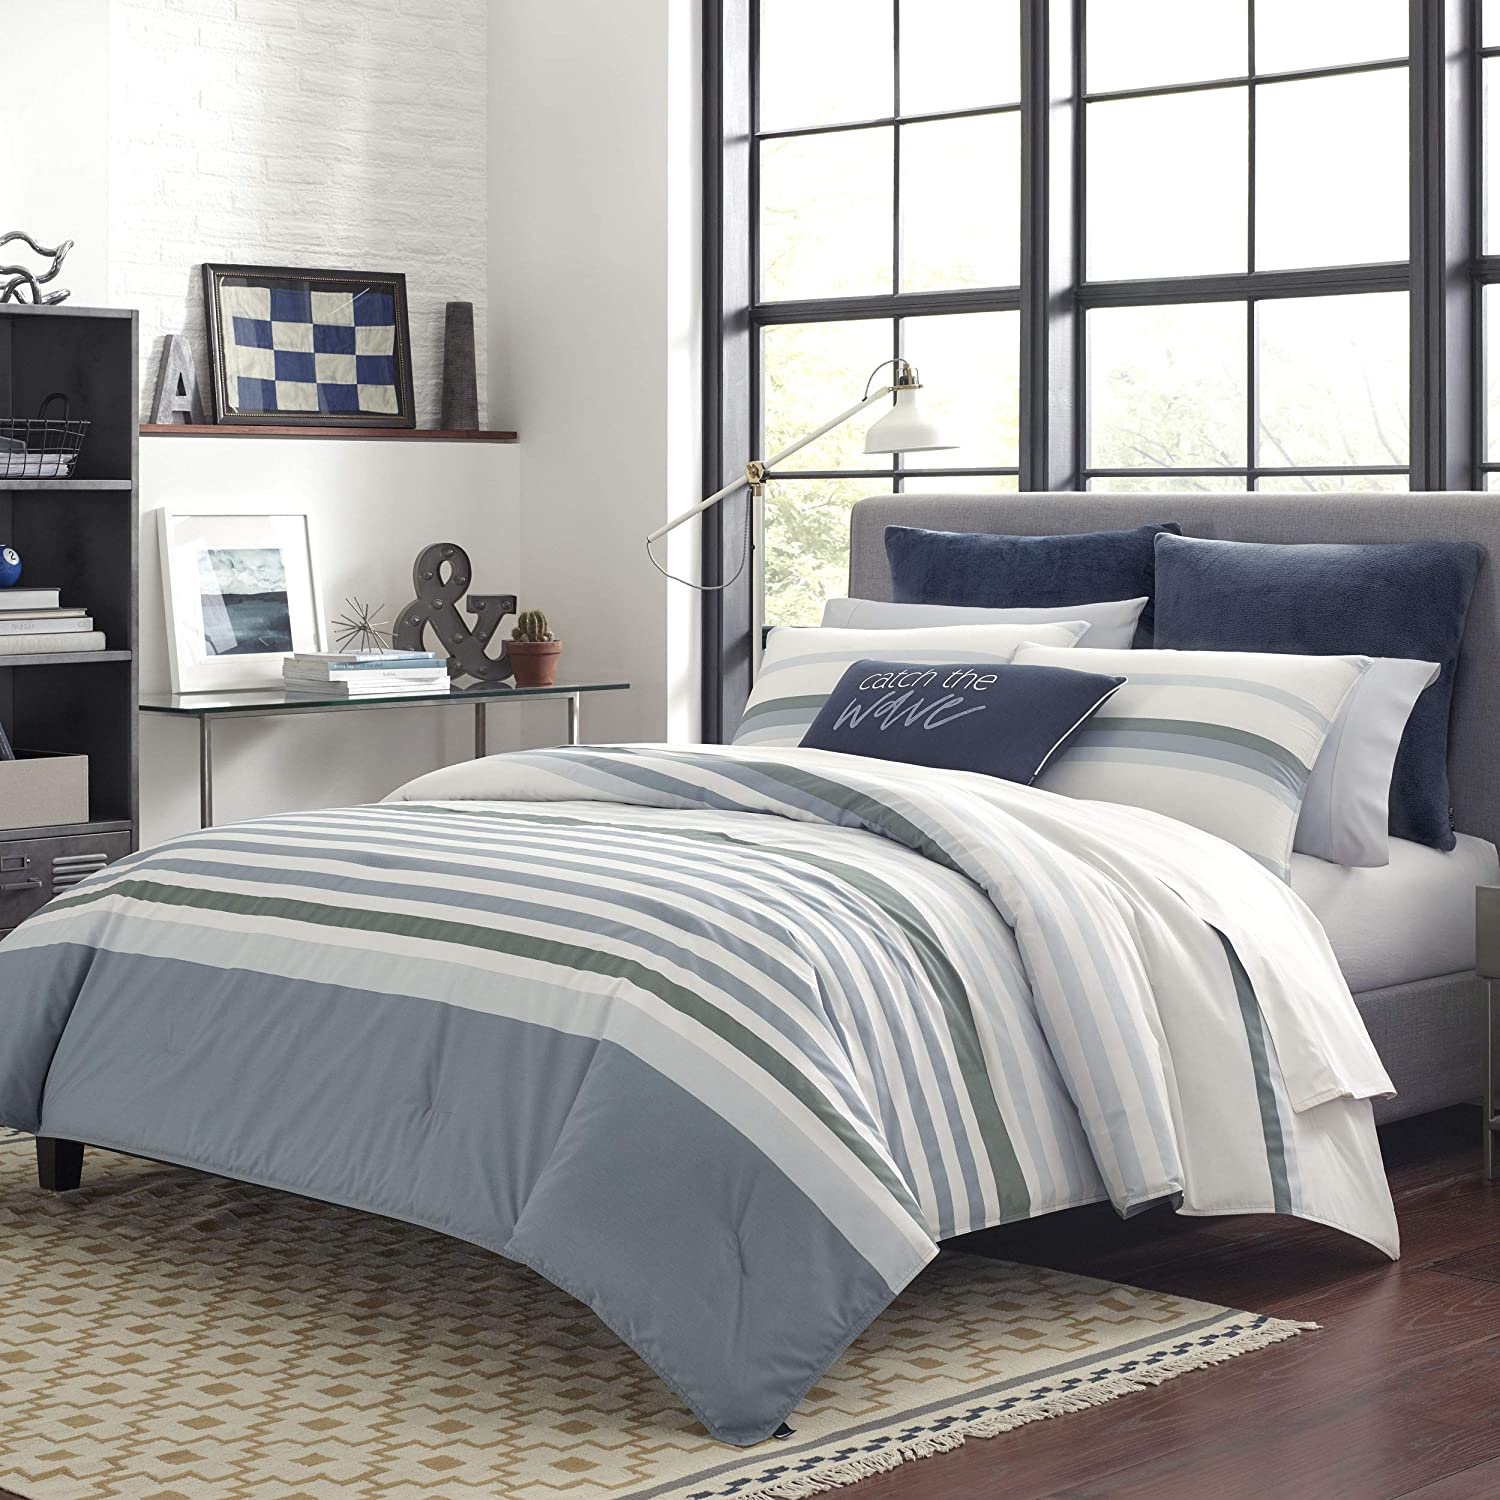 Ultra-Soft 100% Cotton Fabric Pl Details about   NauticaModern CollectionComforter Set 